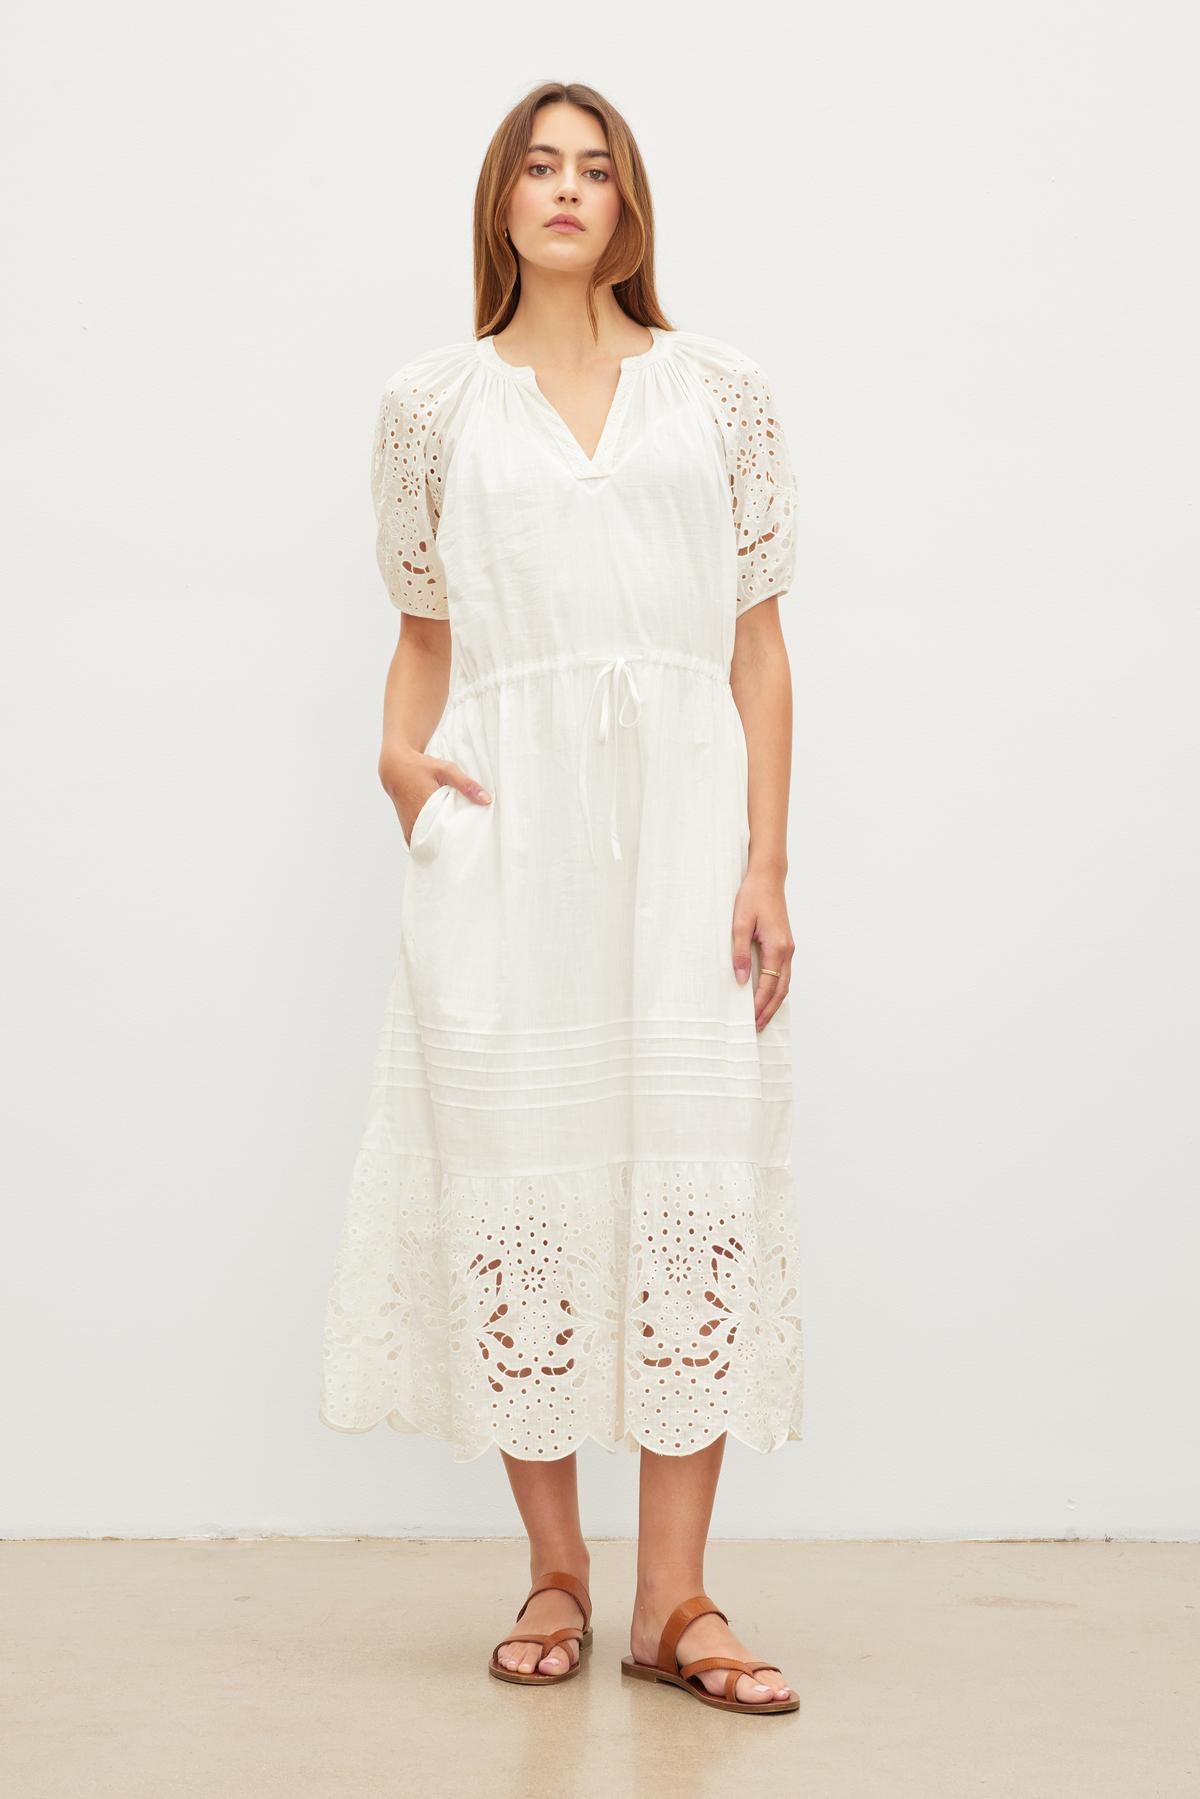   A woman standing in a white room wearing a white, NADIA EMBROIDERED COTTON LACE DRESS with short sleeves and brown sandals. She has shoulder-length brown hair and a neutral expression. 